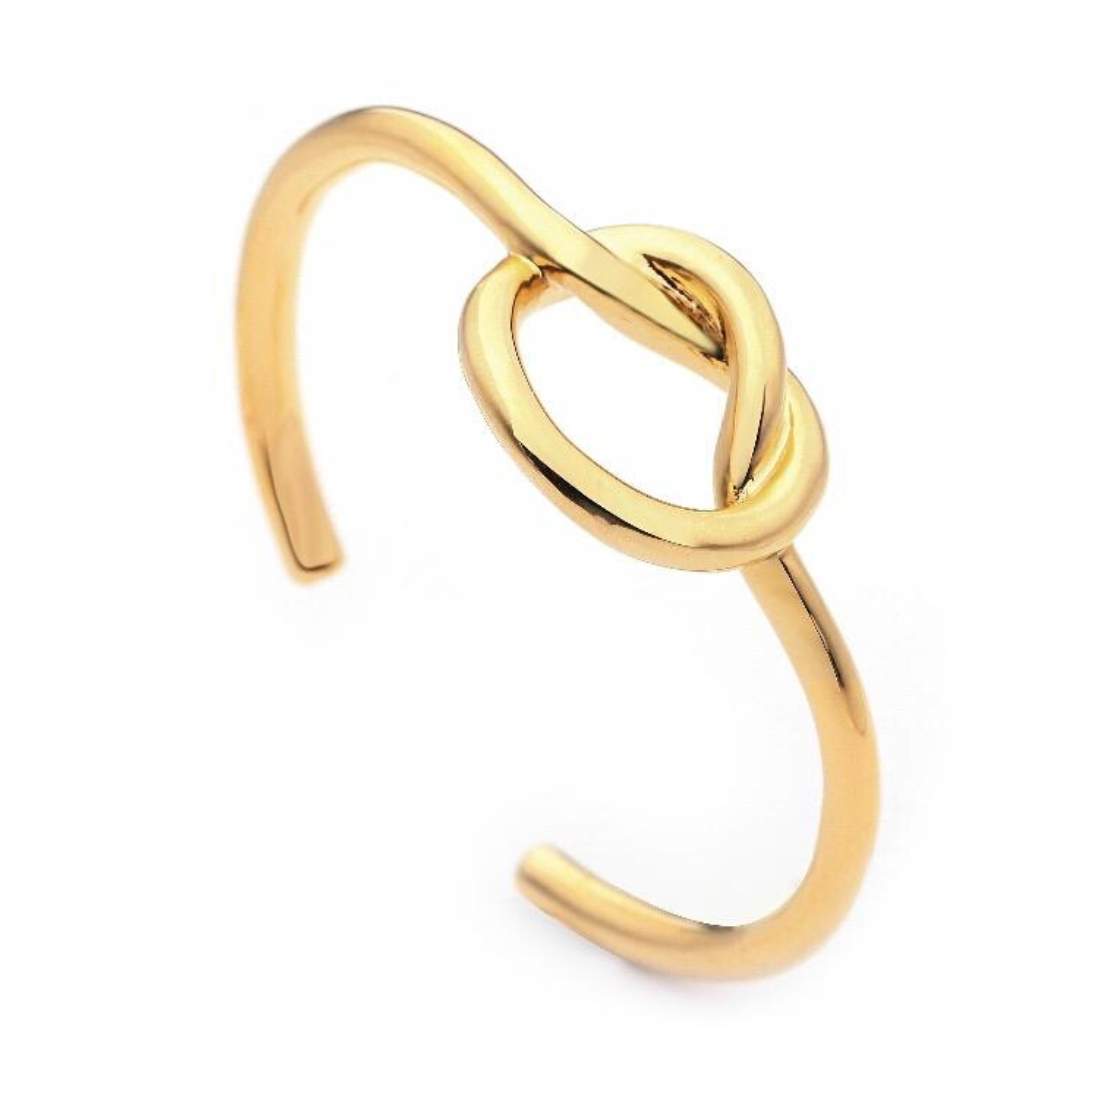 Gold Knotted Cuff Bracelet